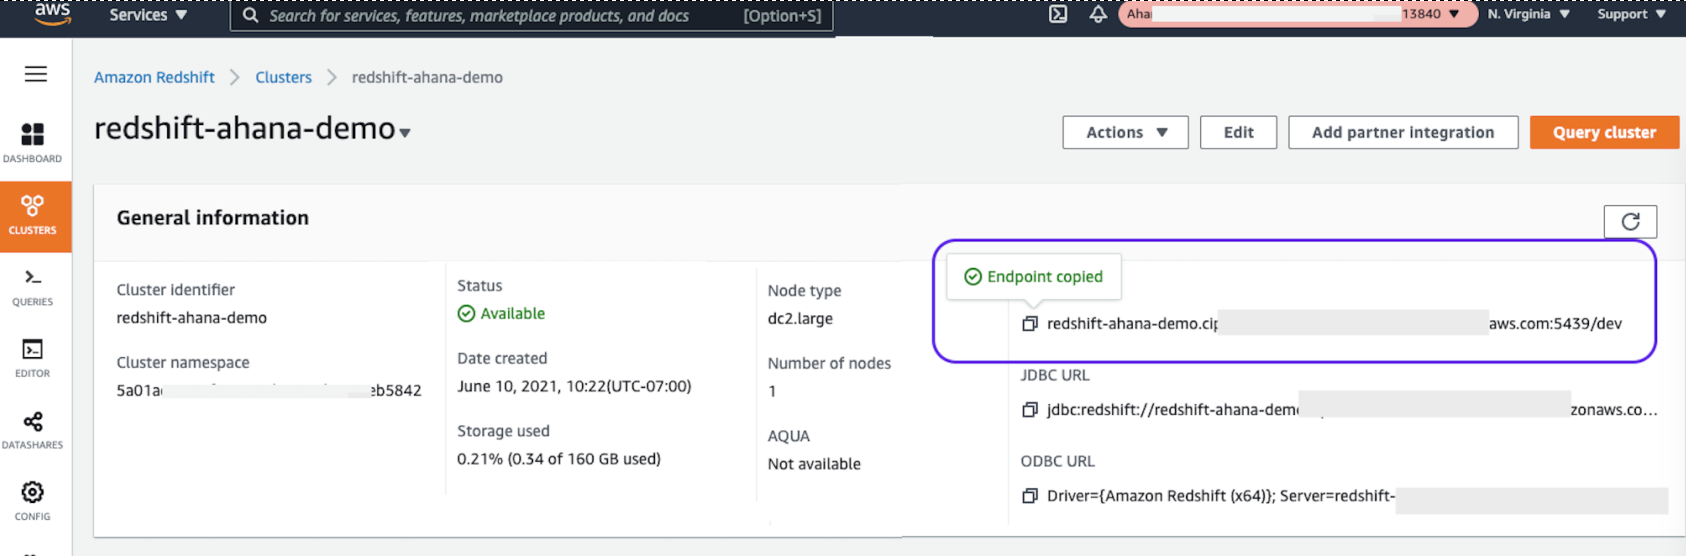 Get the endpoint Information from the Amazon Redshift Console